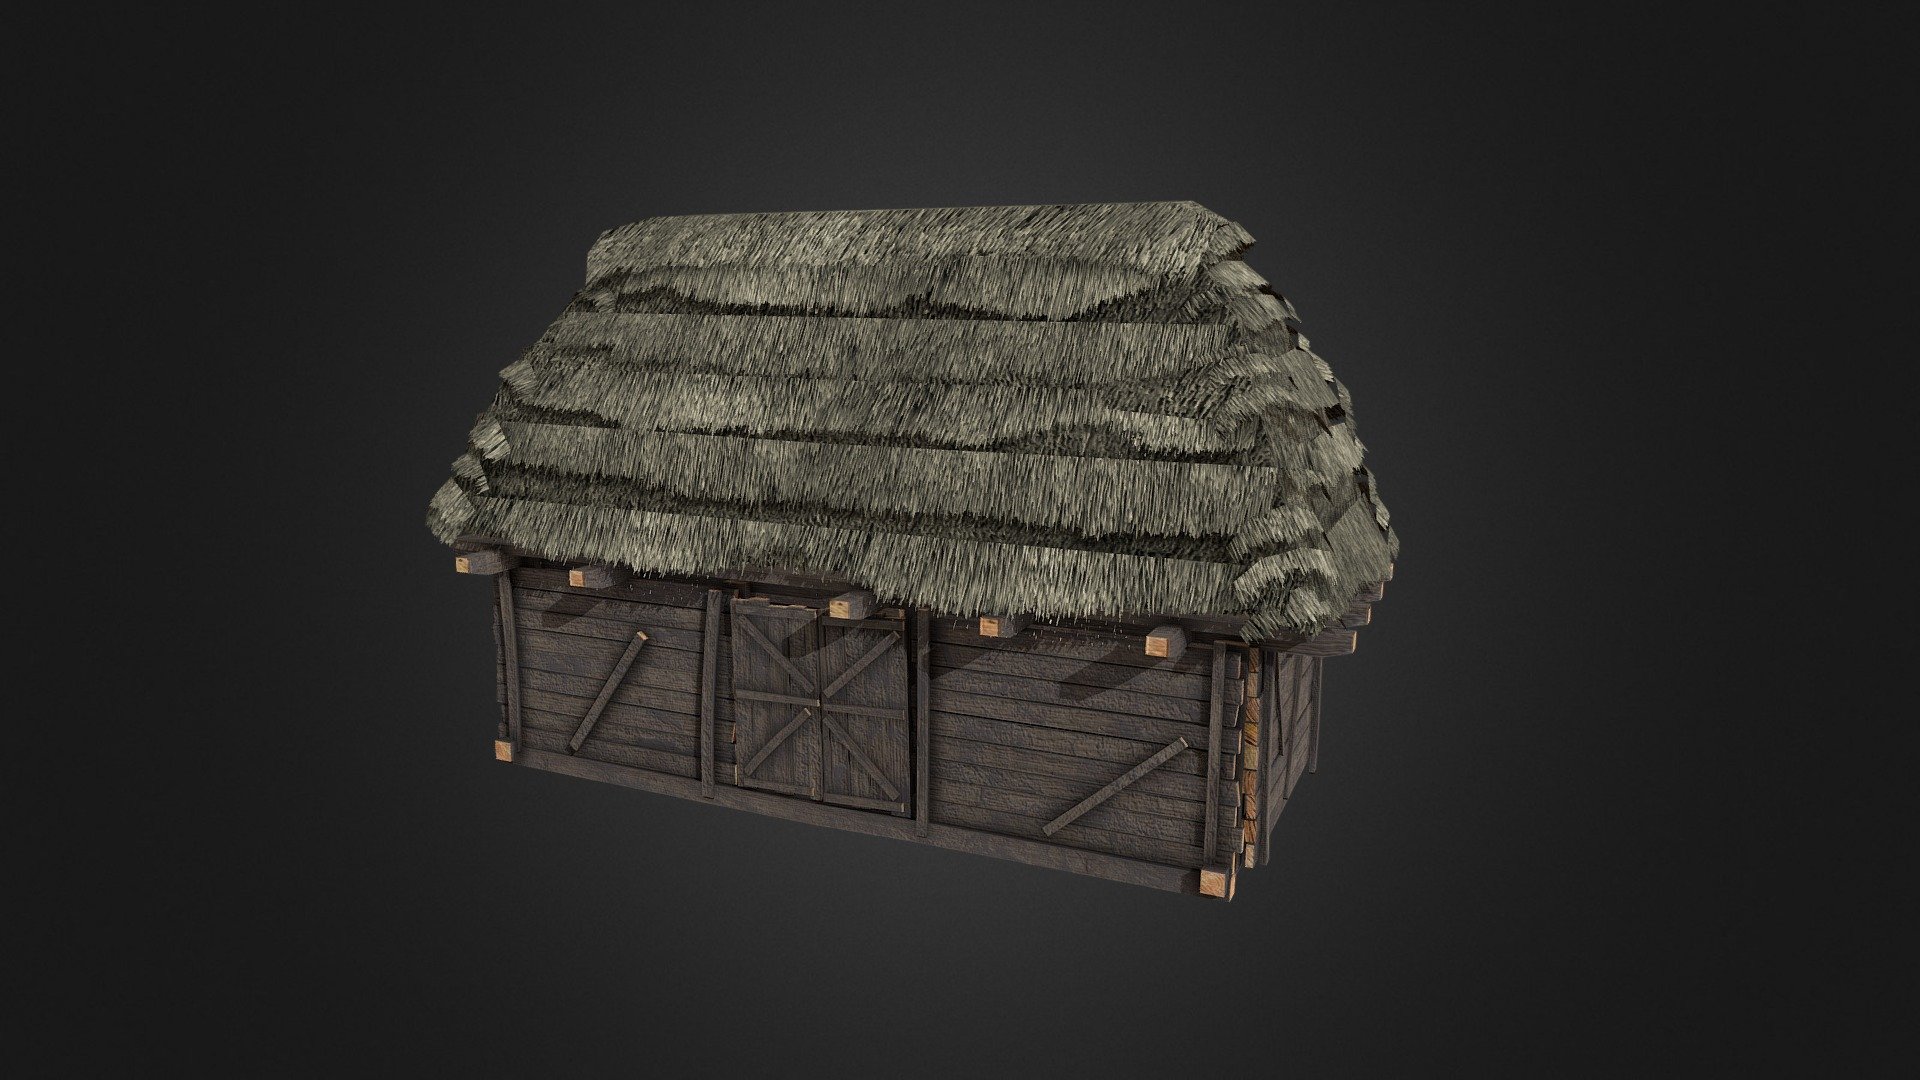 2k textures. Done in 3dsmax and substance + photoshop 3d model